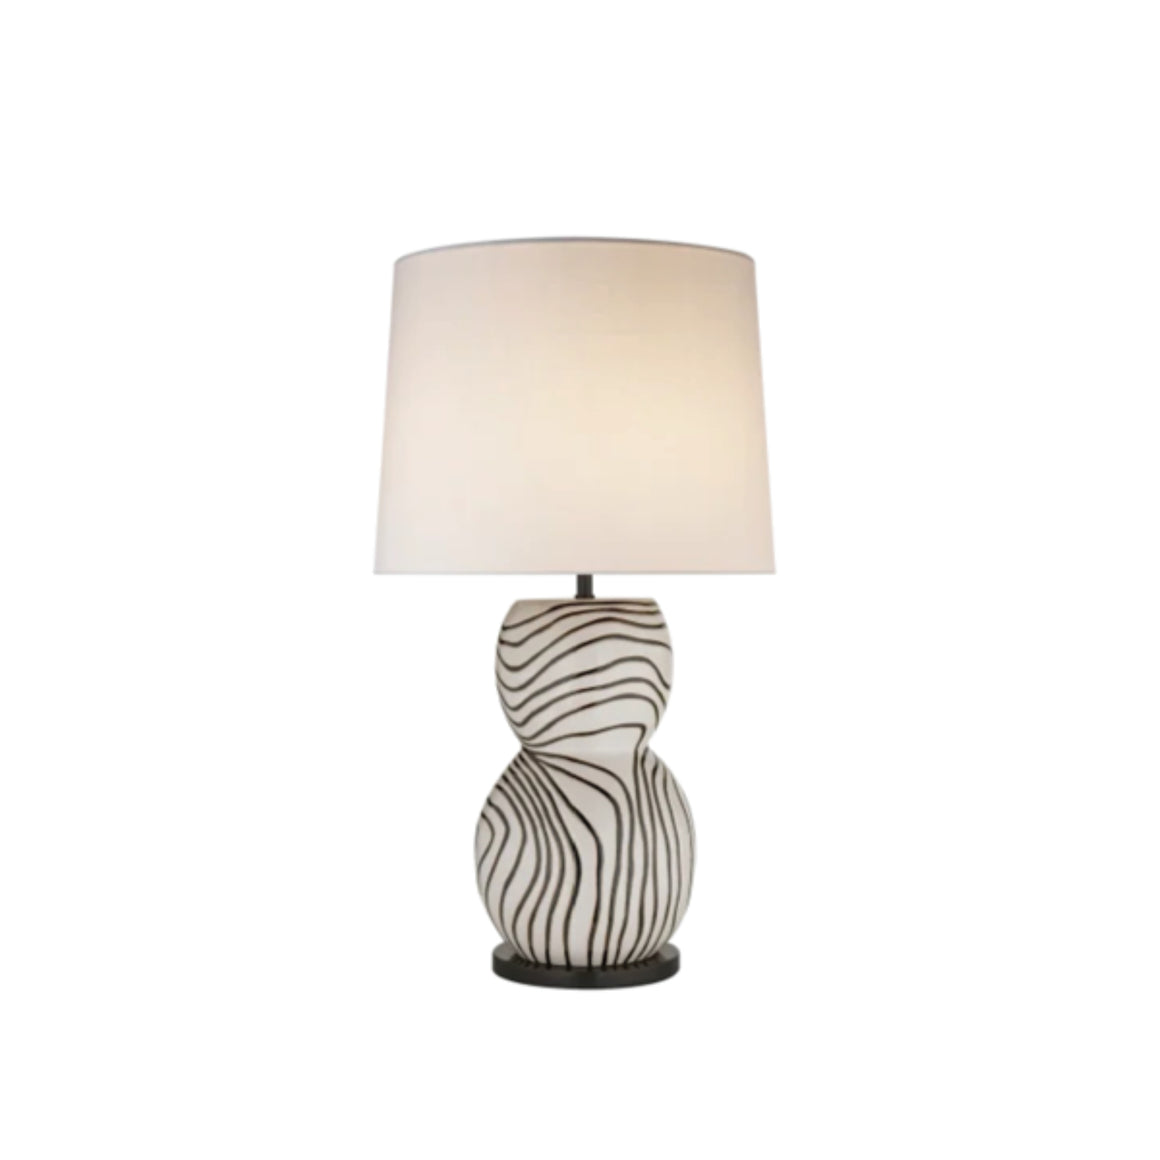 Balla Large Hand-Painted Table Lamp